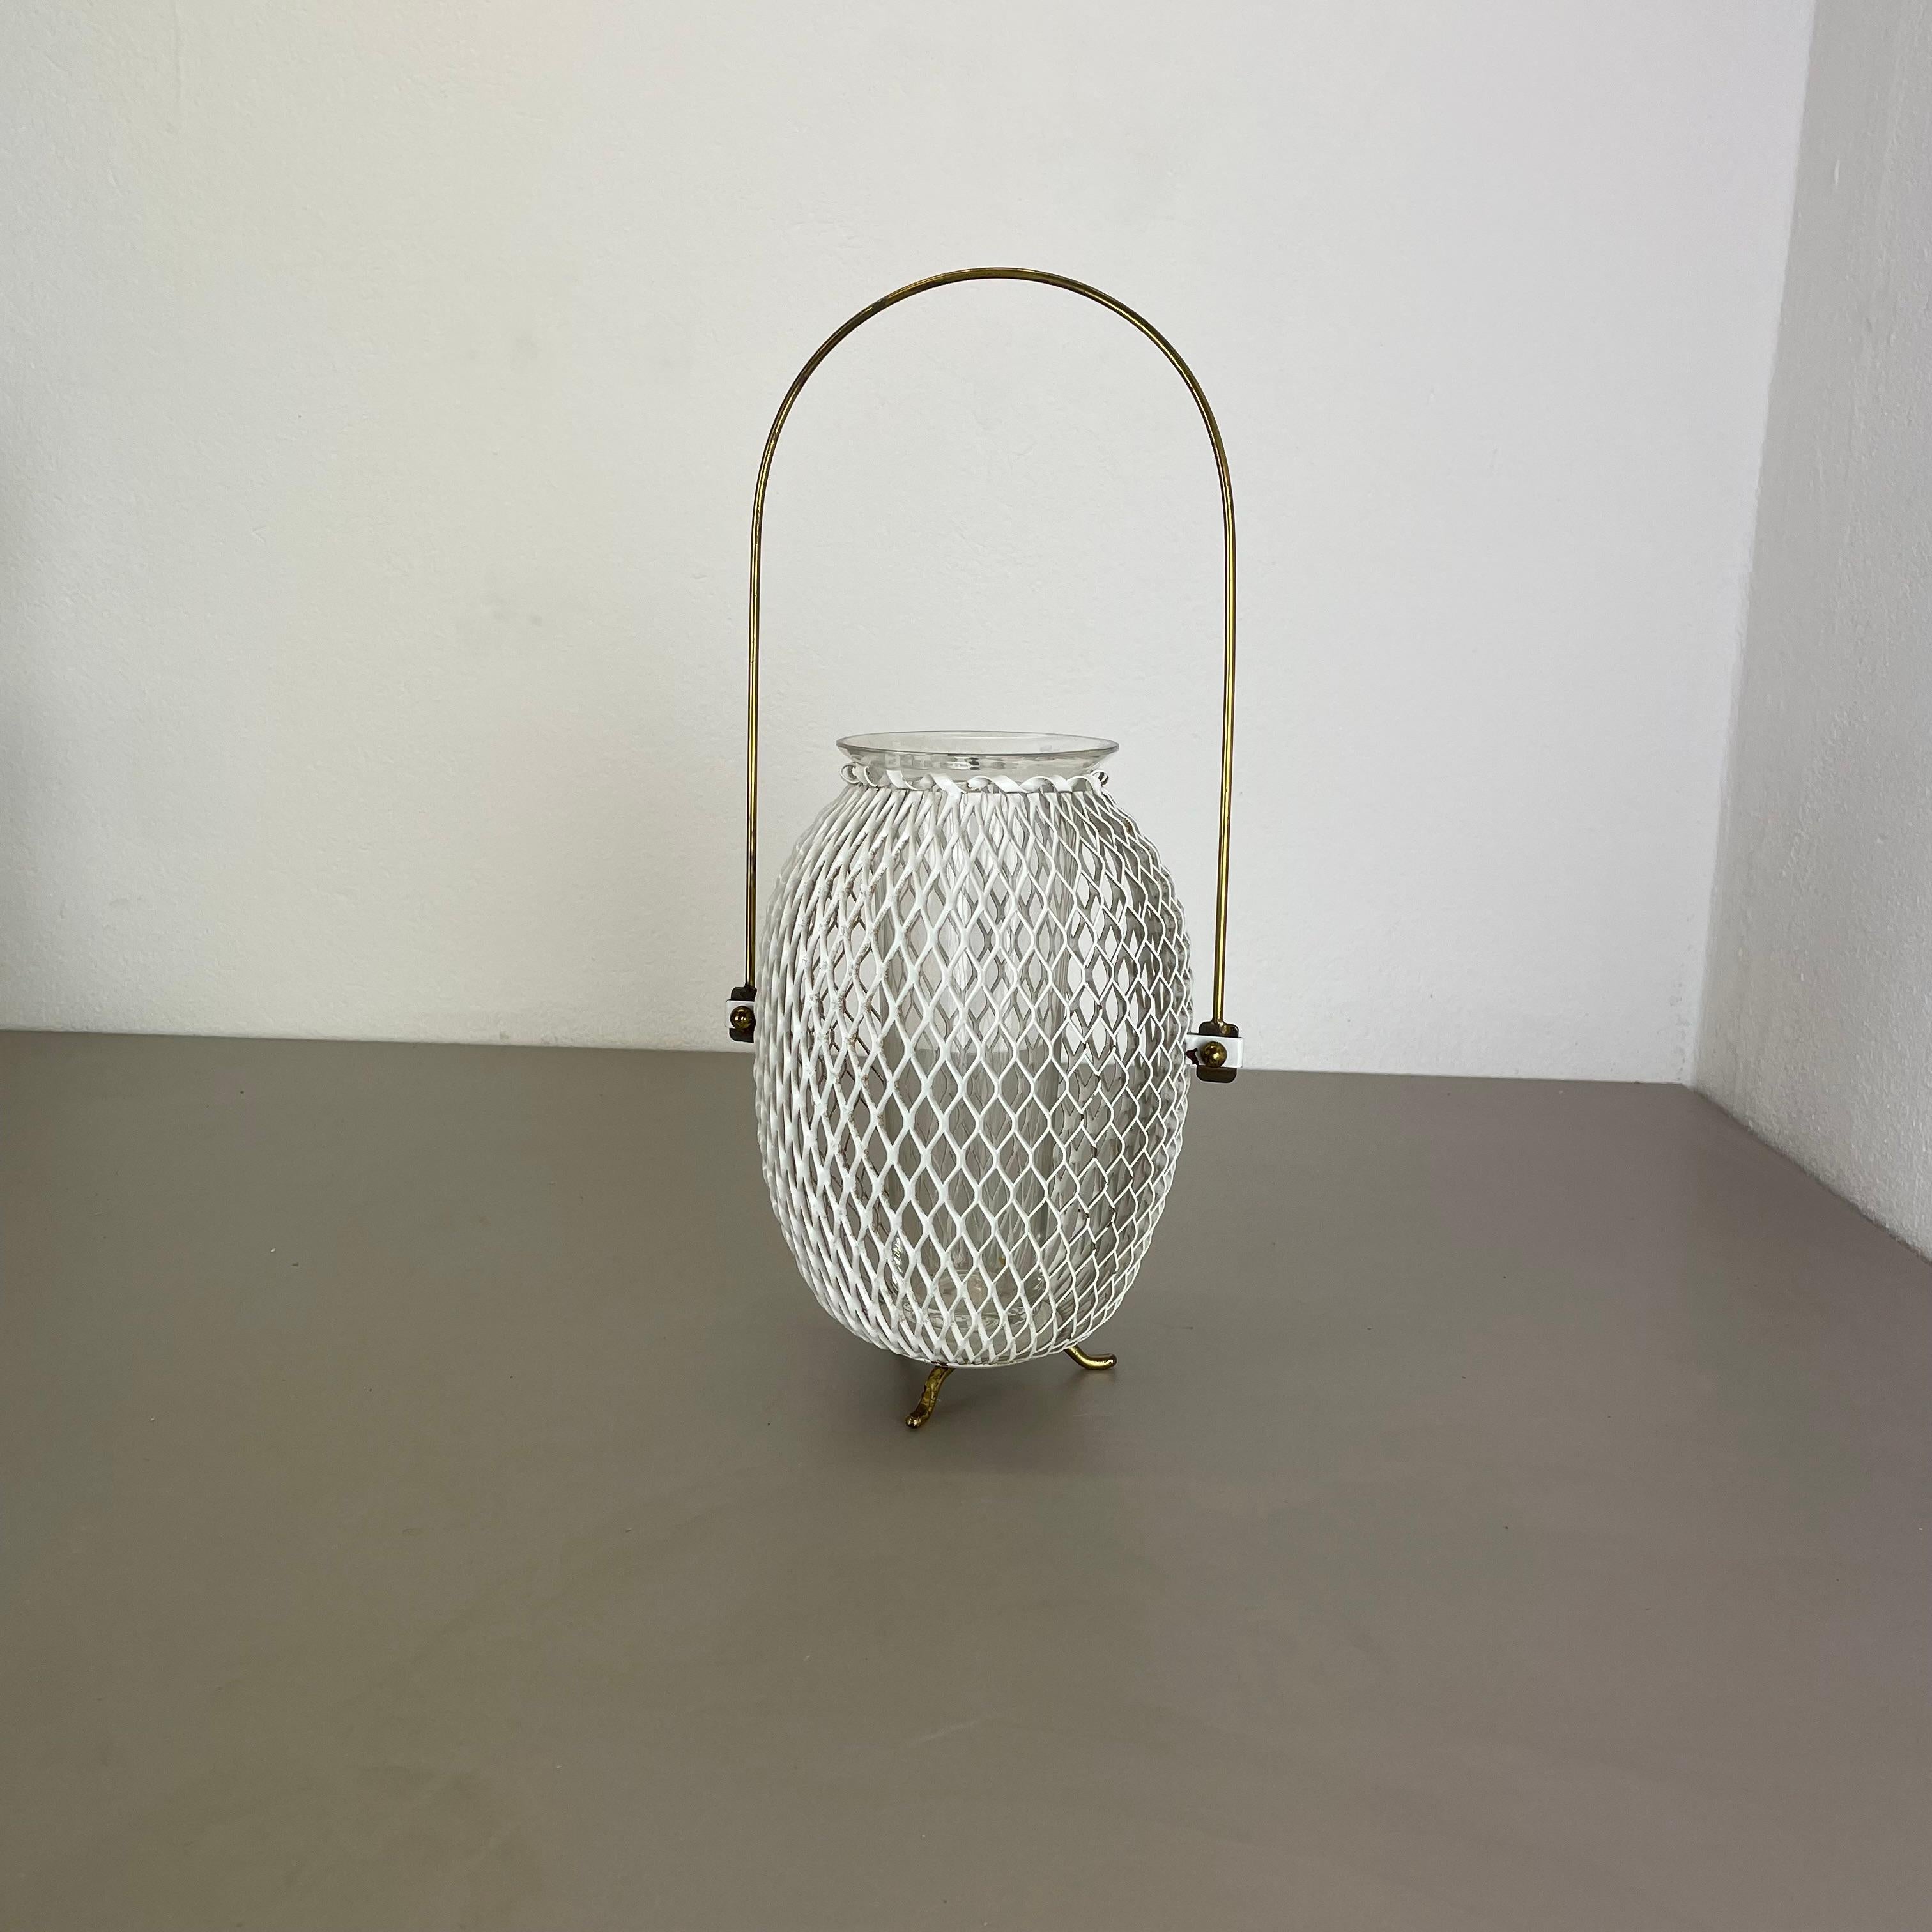 Article:

modernist metal planter vase element


Description:

This original modernist planter vase element vase was produced in the 1950s in France. It is made of white lacquered metal with a round brass handle at the top. the pot has a glass vase